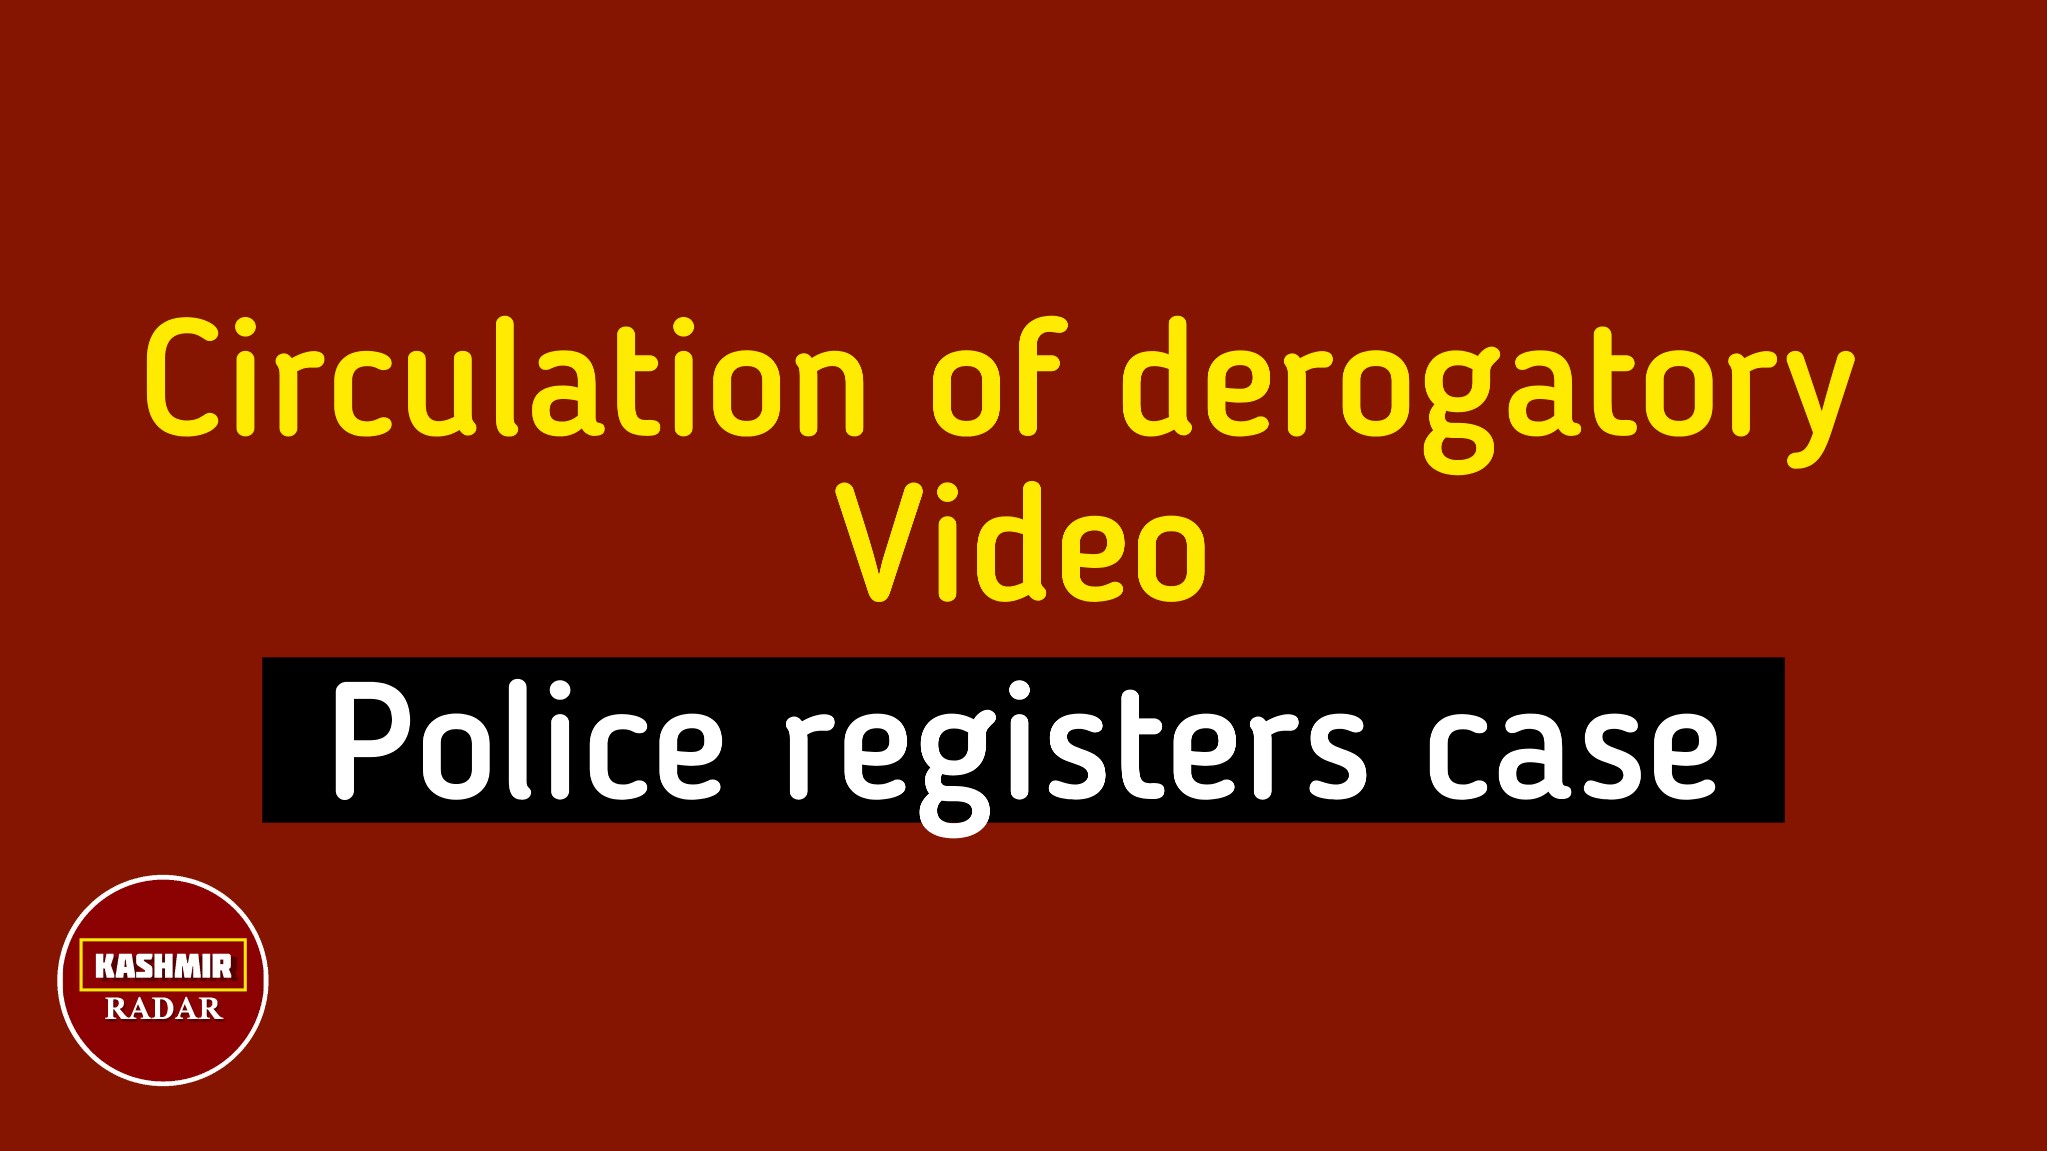 Police registers case against circulation of derogatory video